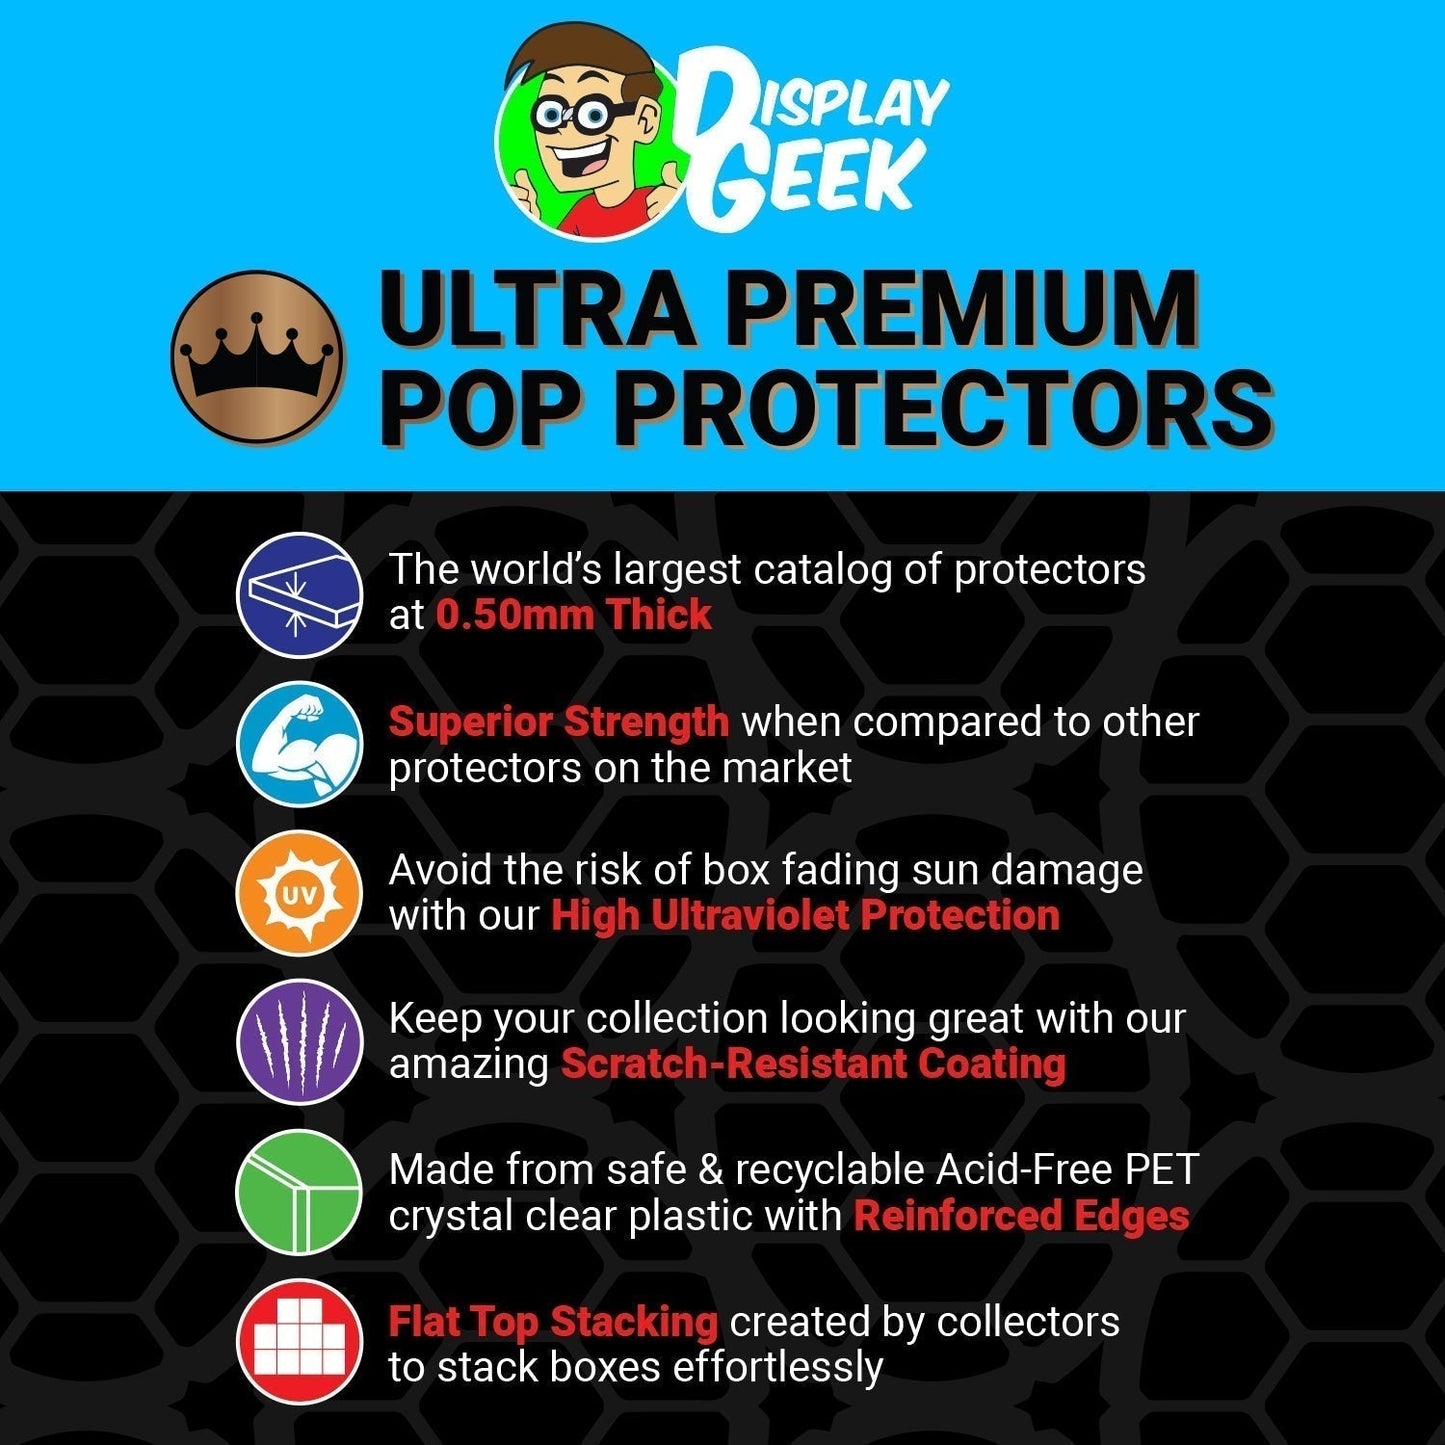 Pop Protector for Hollywood Tower Hotel and Mickey Mouse Gold #31 Funko Pop Town - PPG Pop Protector Guide Search Created by Display Geek